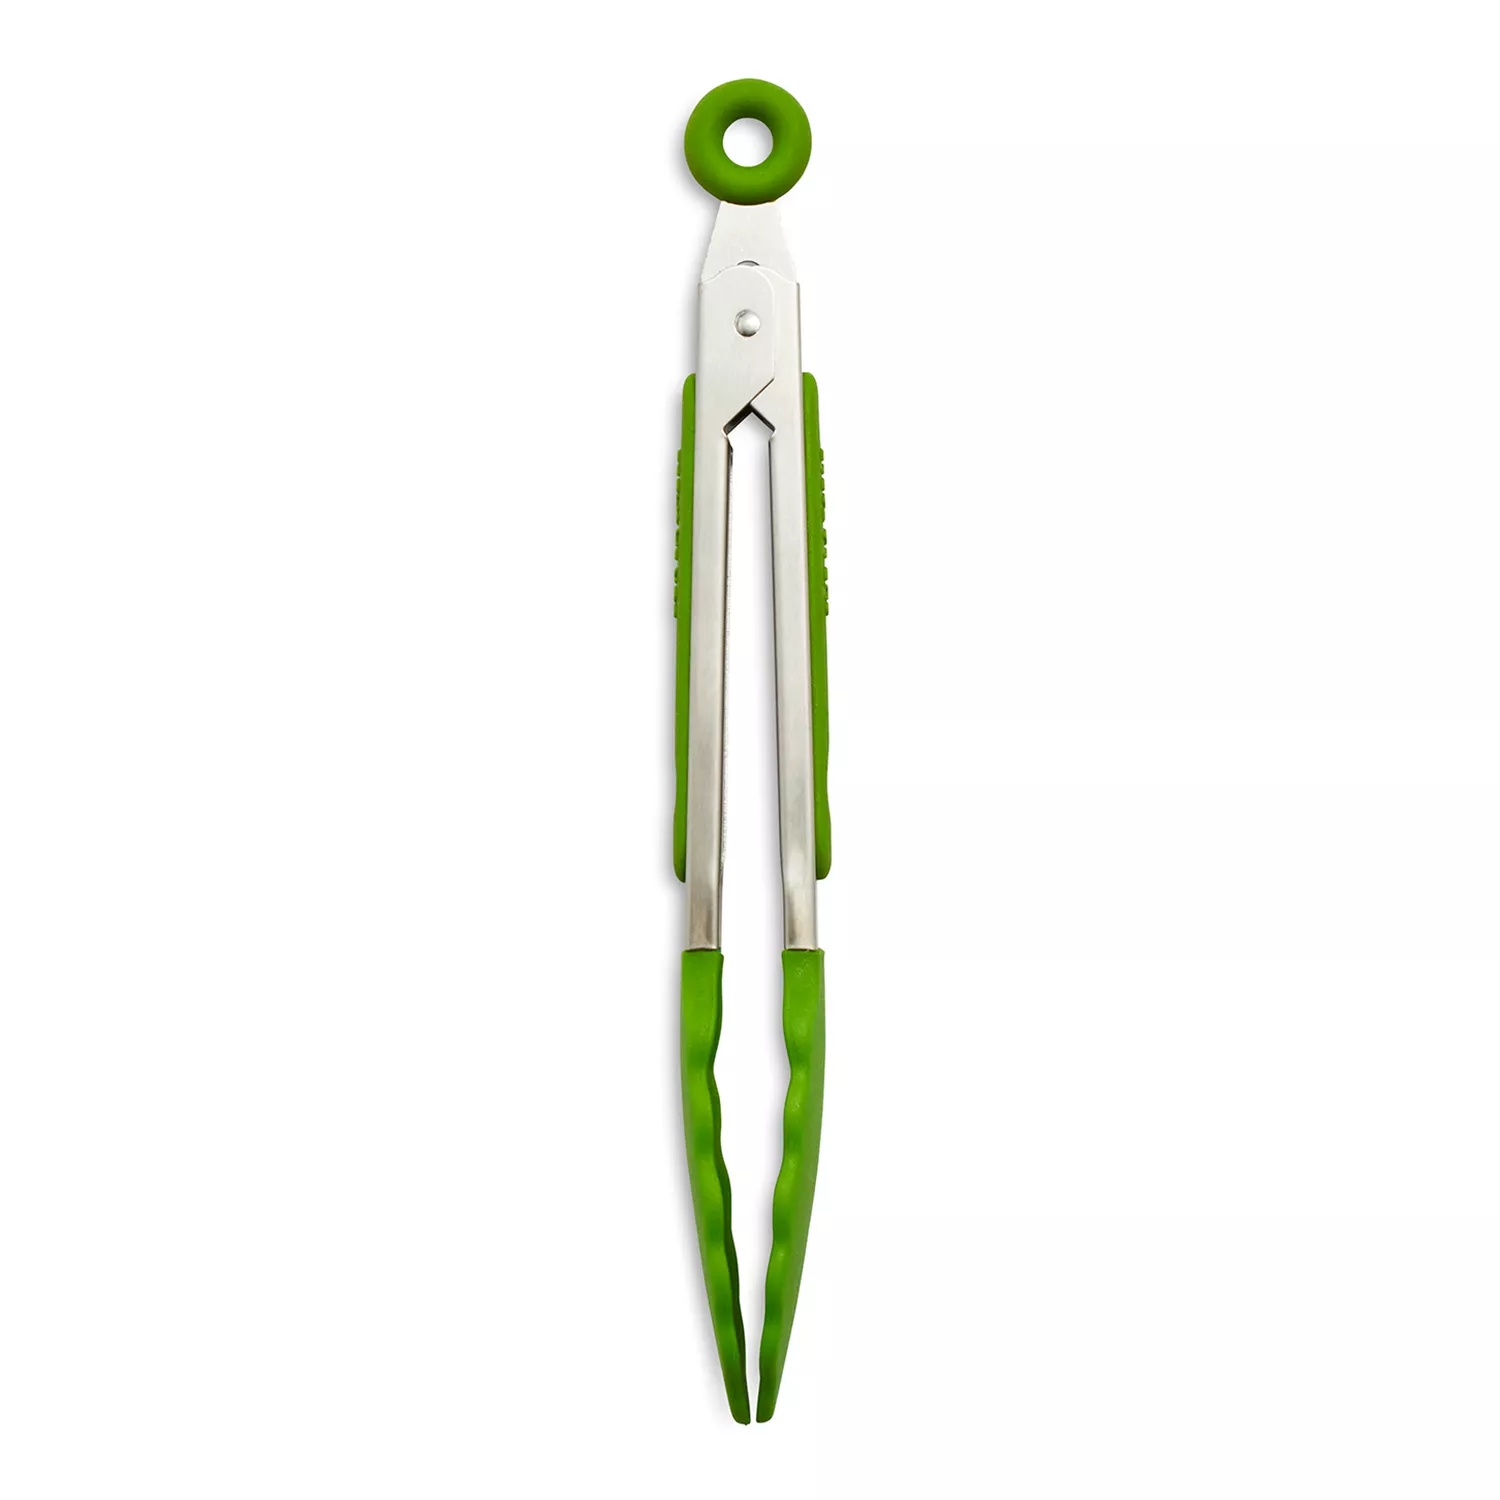 Mini Tongs With Silicone Tips, 7-Inch Serving Tongs - Set of 3 (Green Red  Blue) 